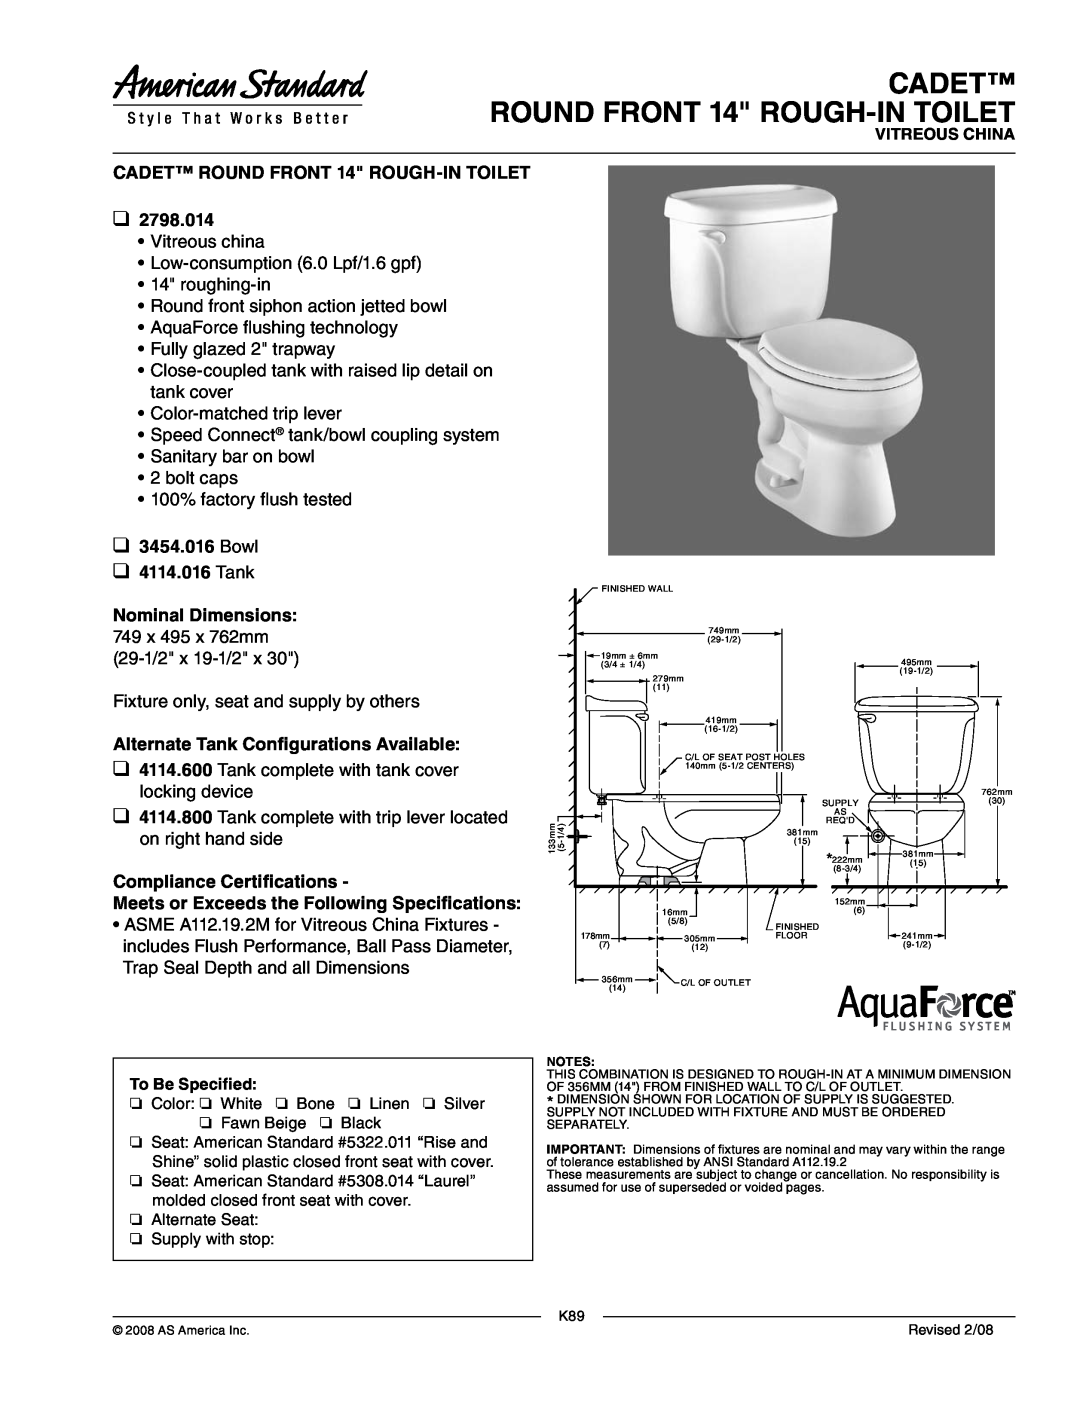 American Standard 2798.014 dimensions CADET ROUND FRONT 14 ROUGH-INTOILET, Bowl 4114.016 Tank, Nominal Dimensions 